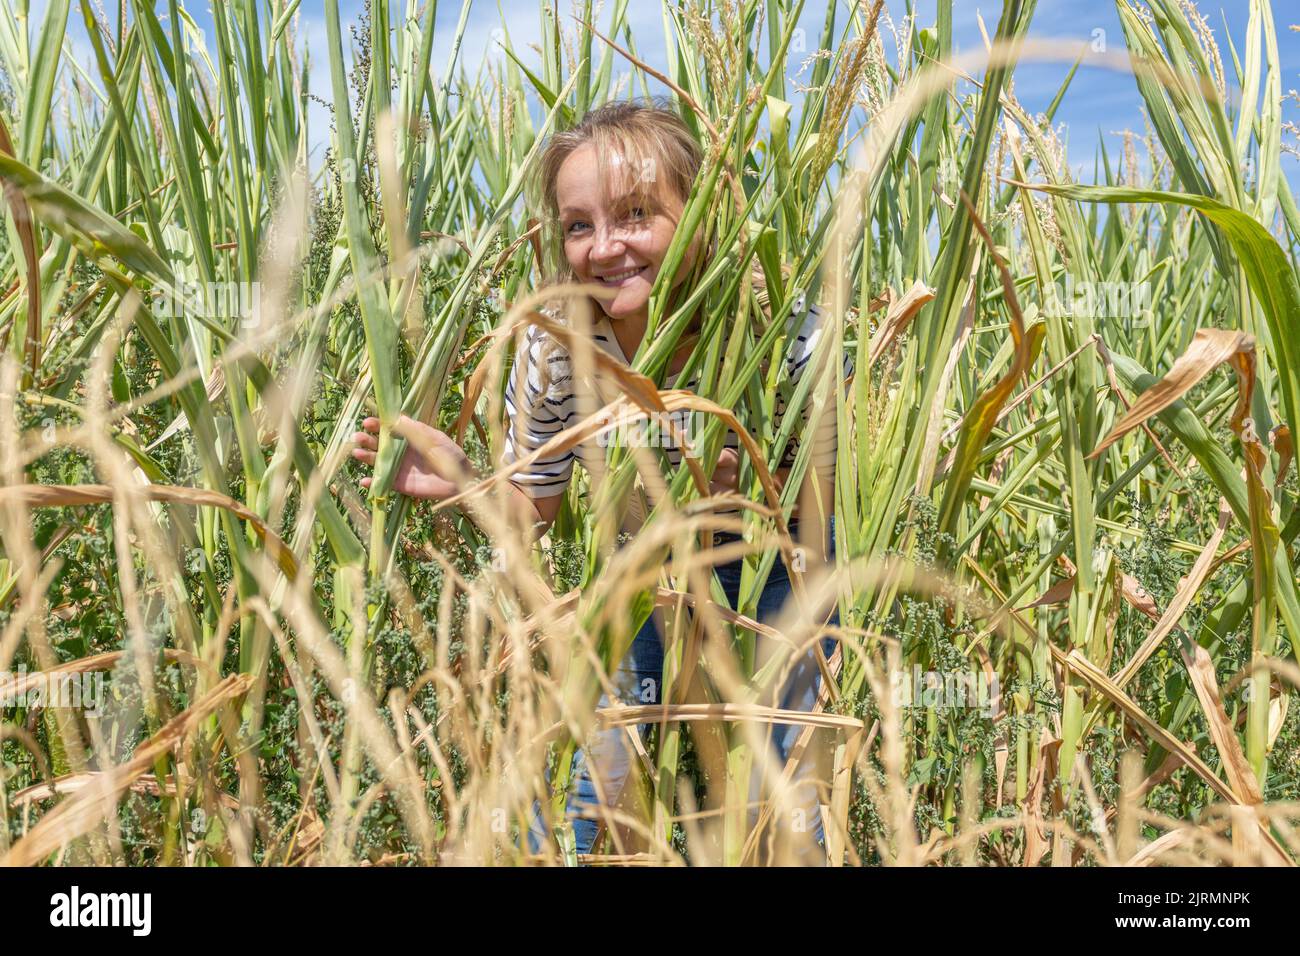 A woman plays hide and seek in a cornfield Stock Photo